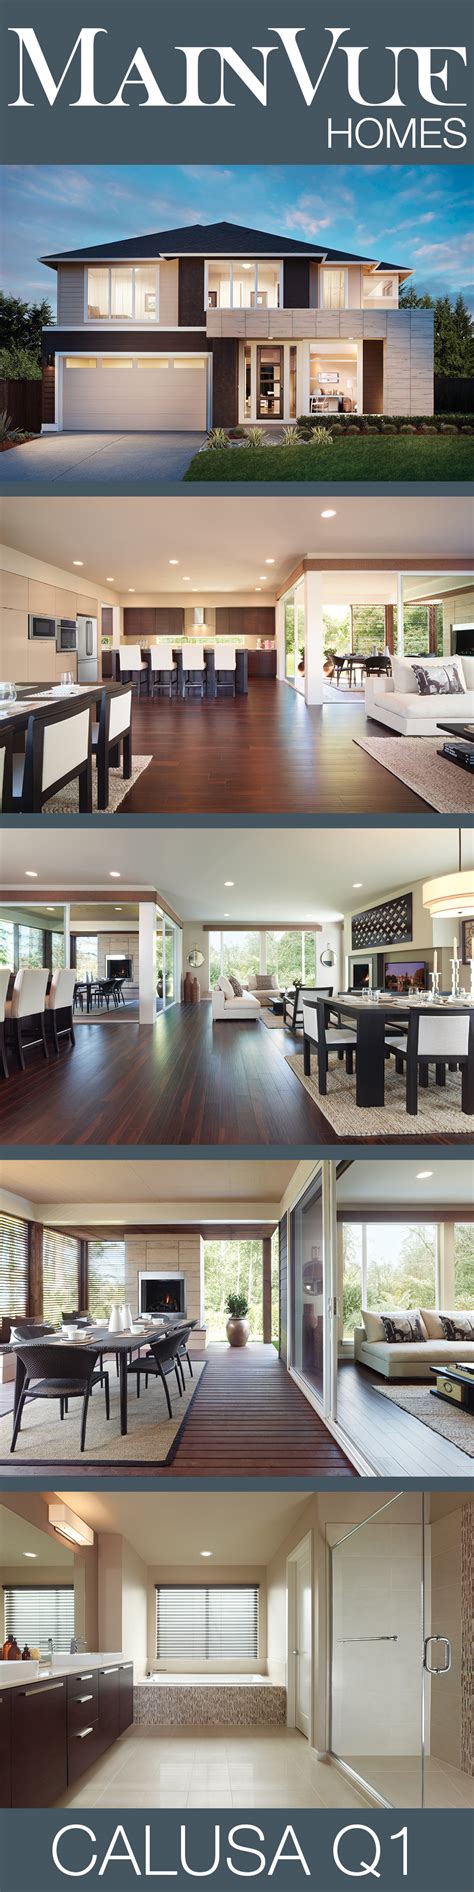 Mainvue Homes Is A Worldwide Leader In New Home Design And Construction